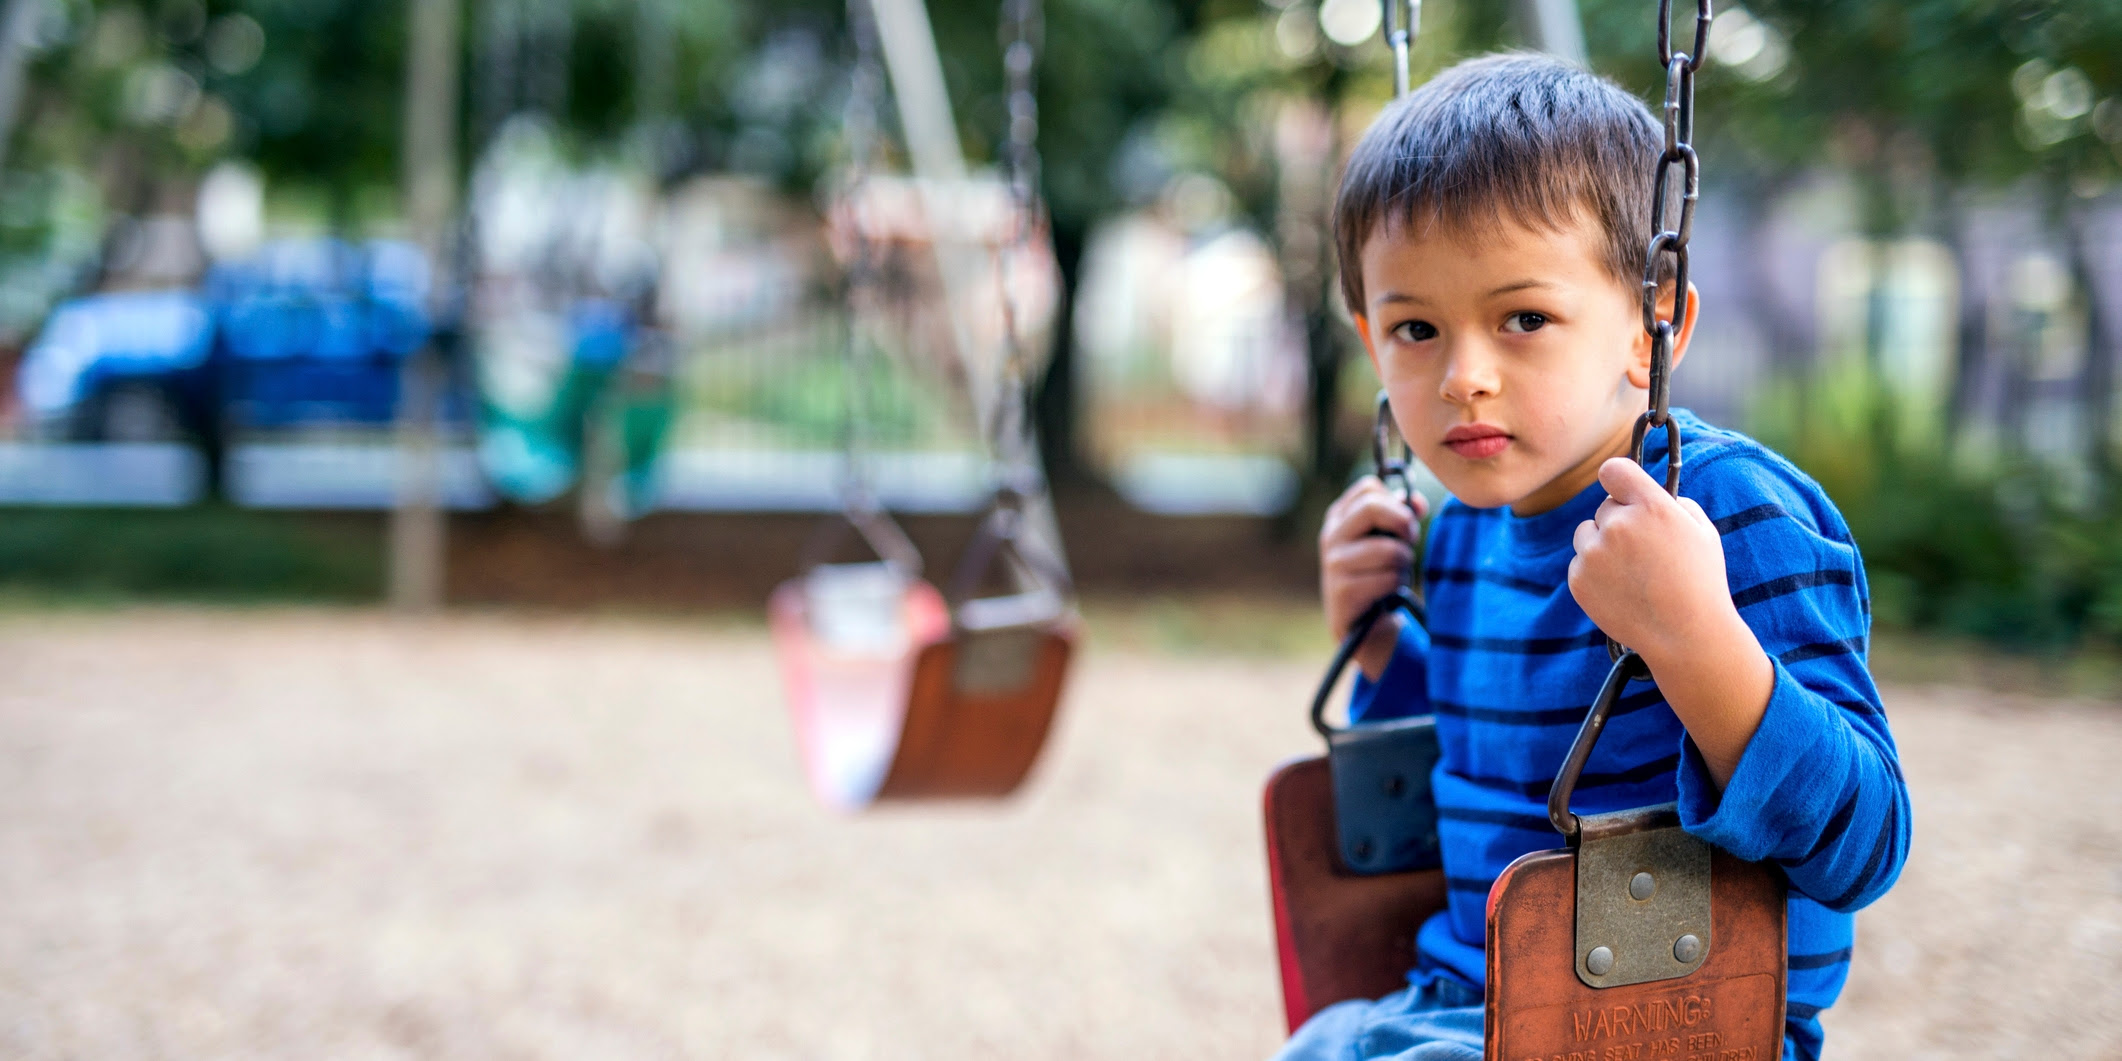 A young, sad child sitting on a swing